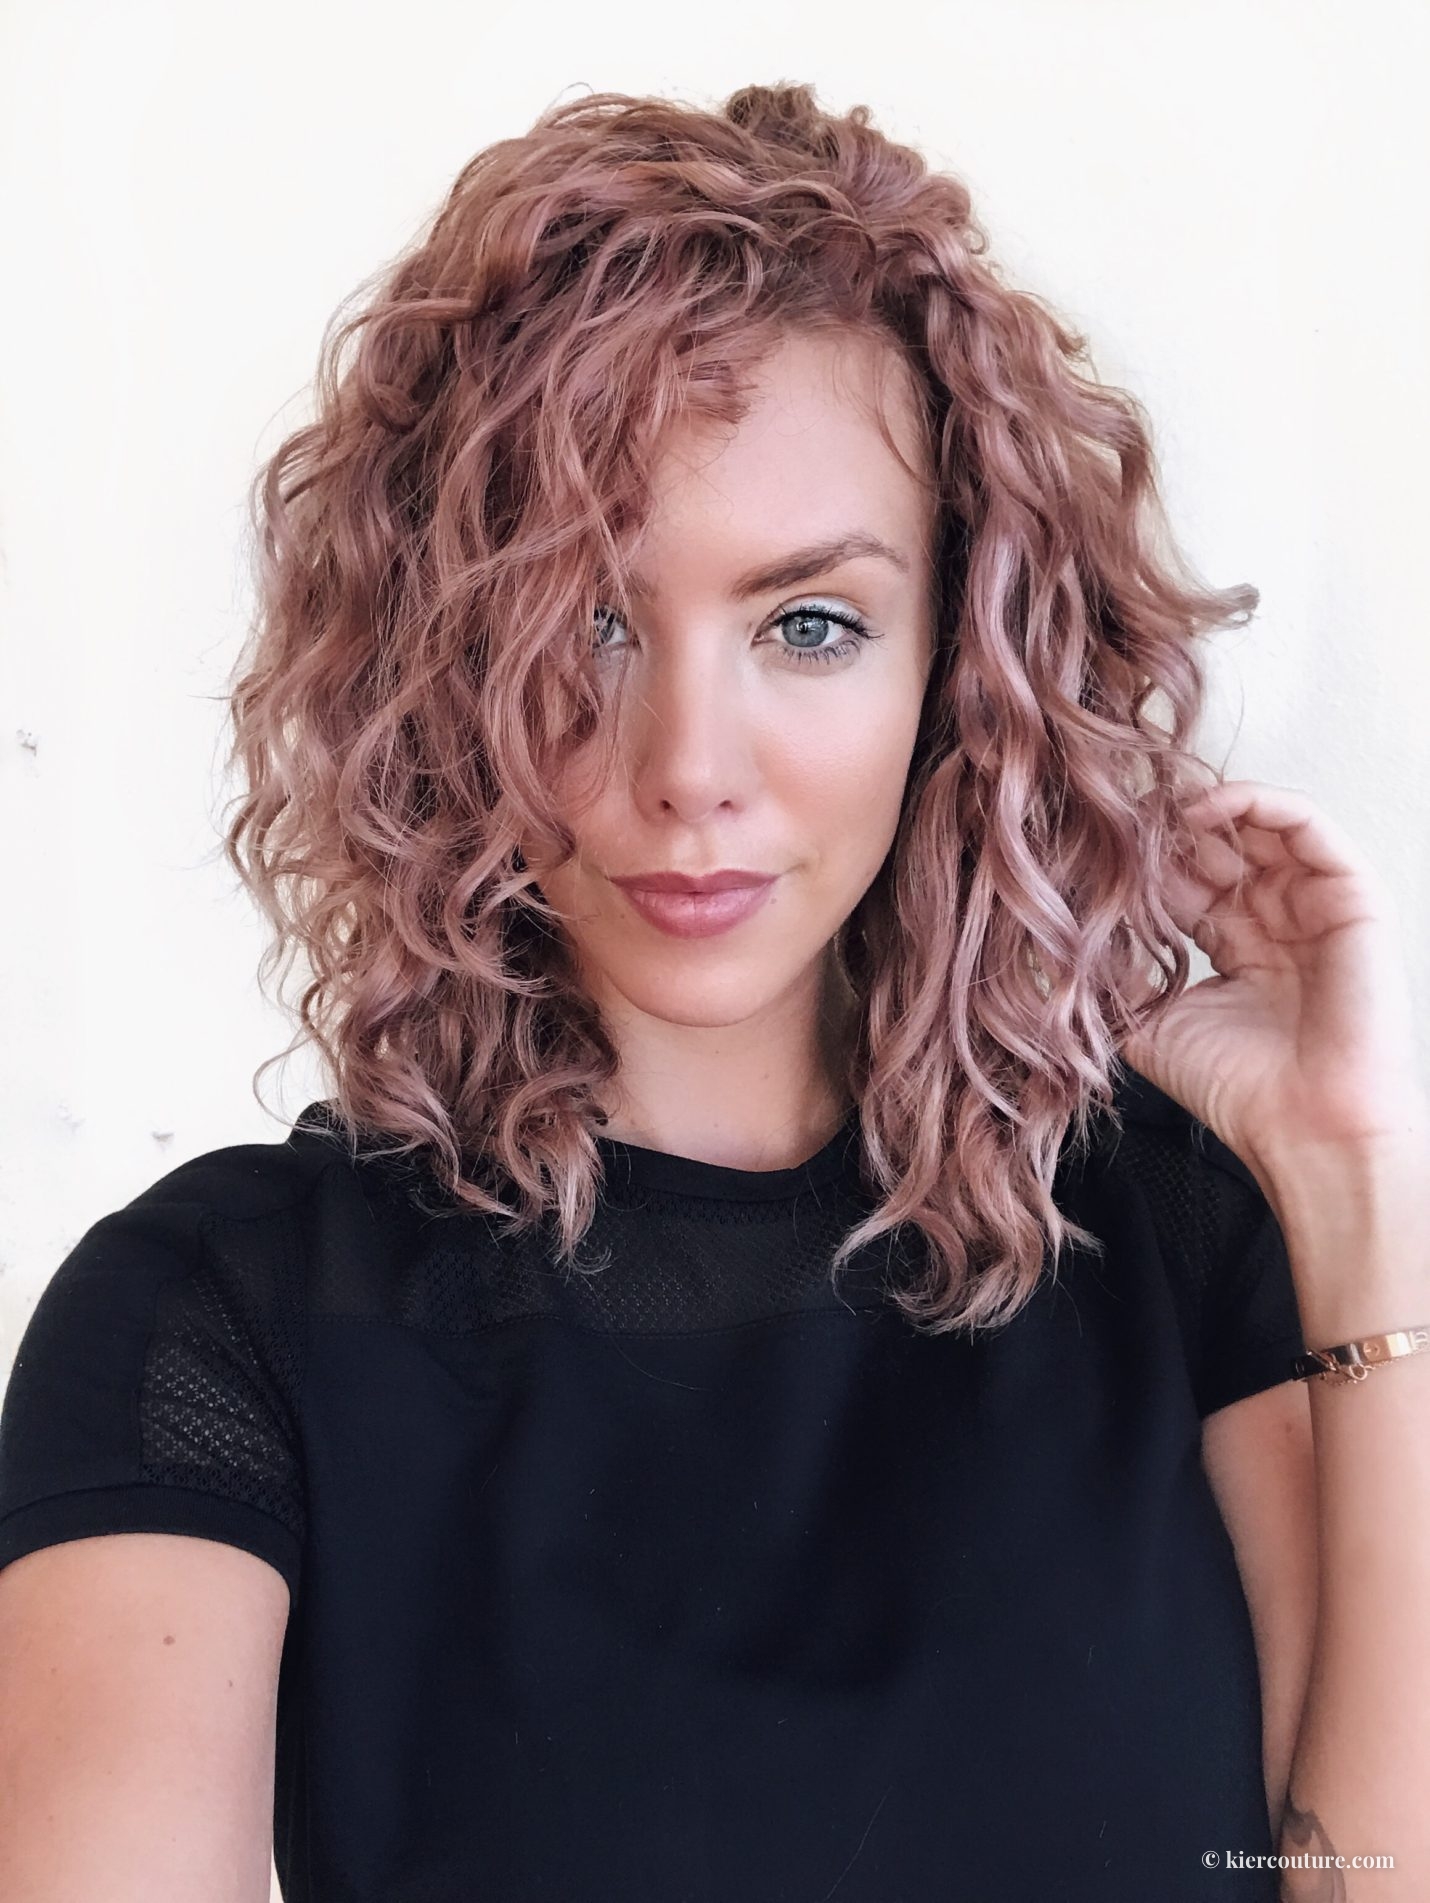 how to get rose gold hair